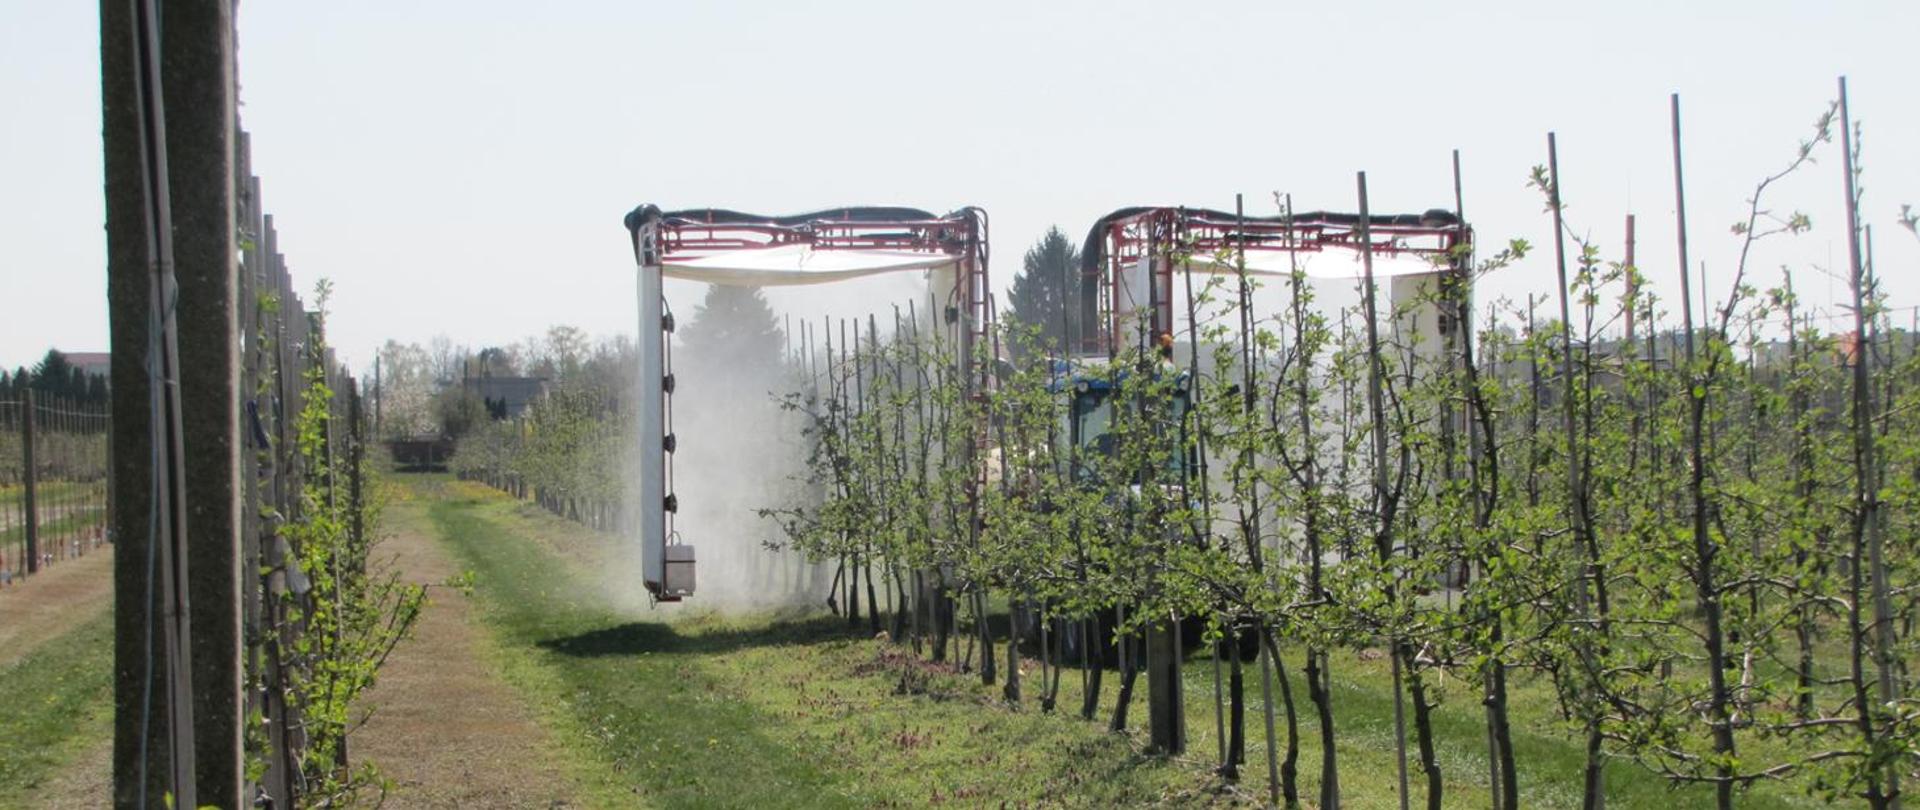 A family of innovative orchard tunnel sprayers with utility liquid recovery
